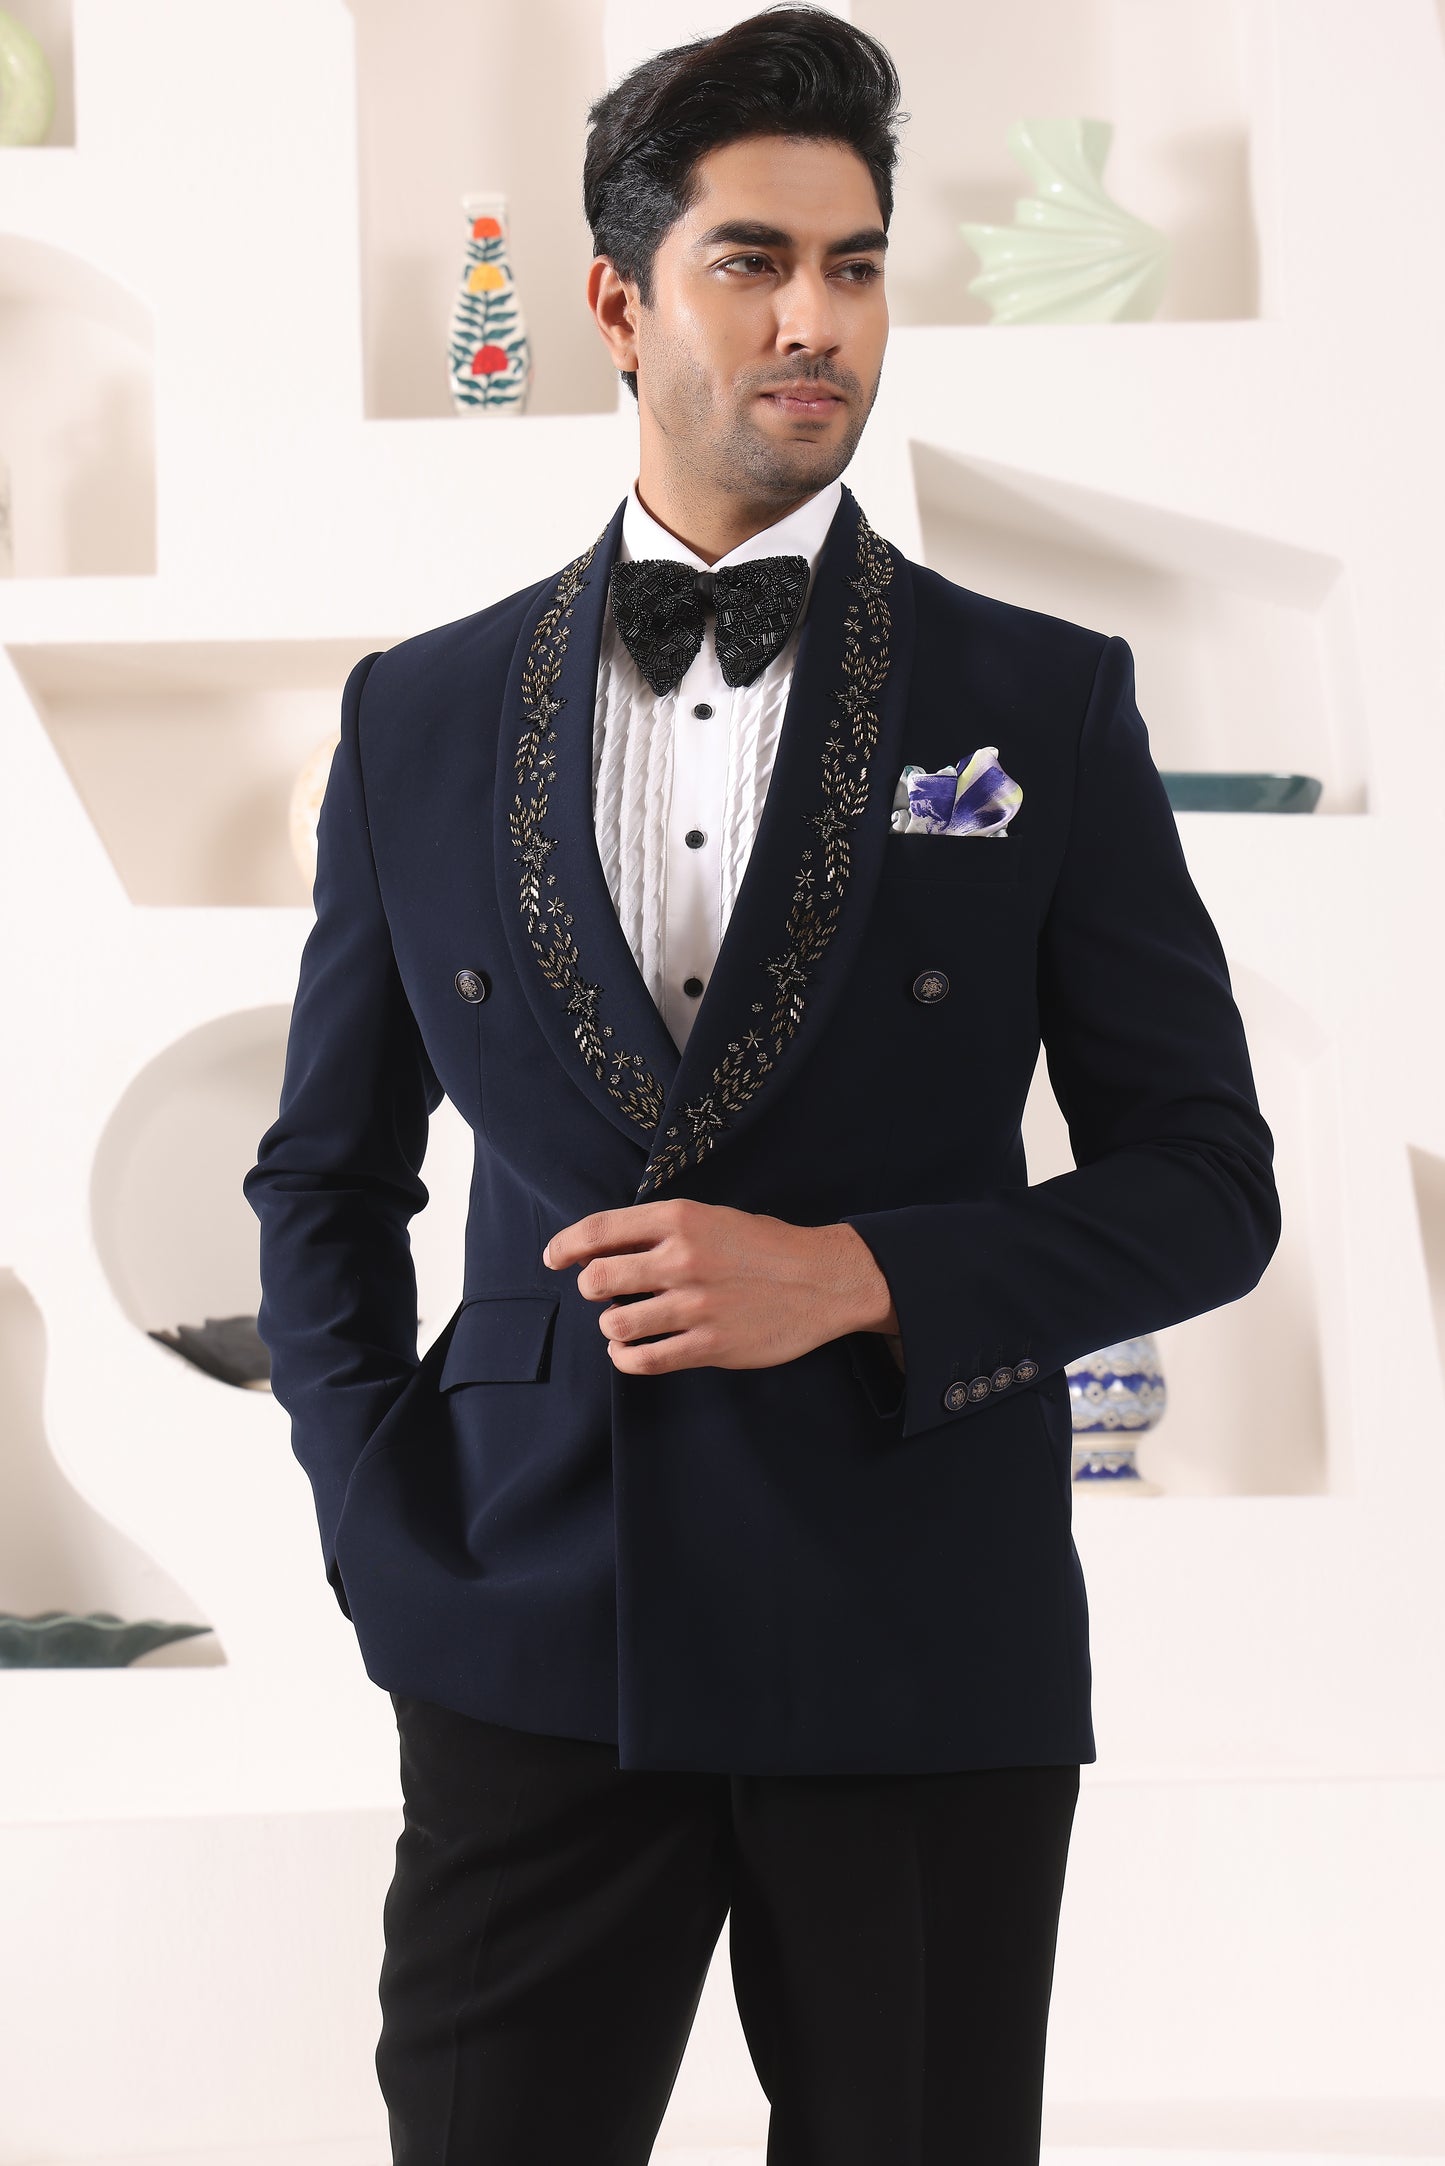 Blue Doublebreast Tuxedo with embroidered collar